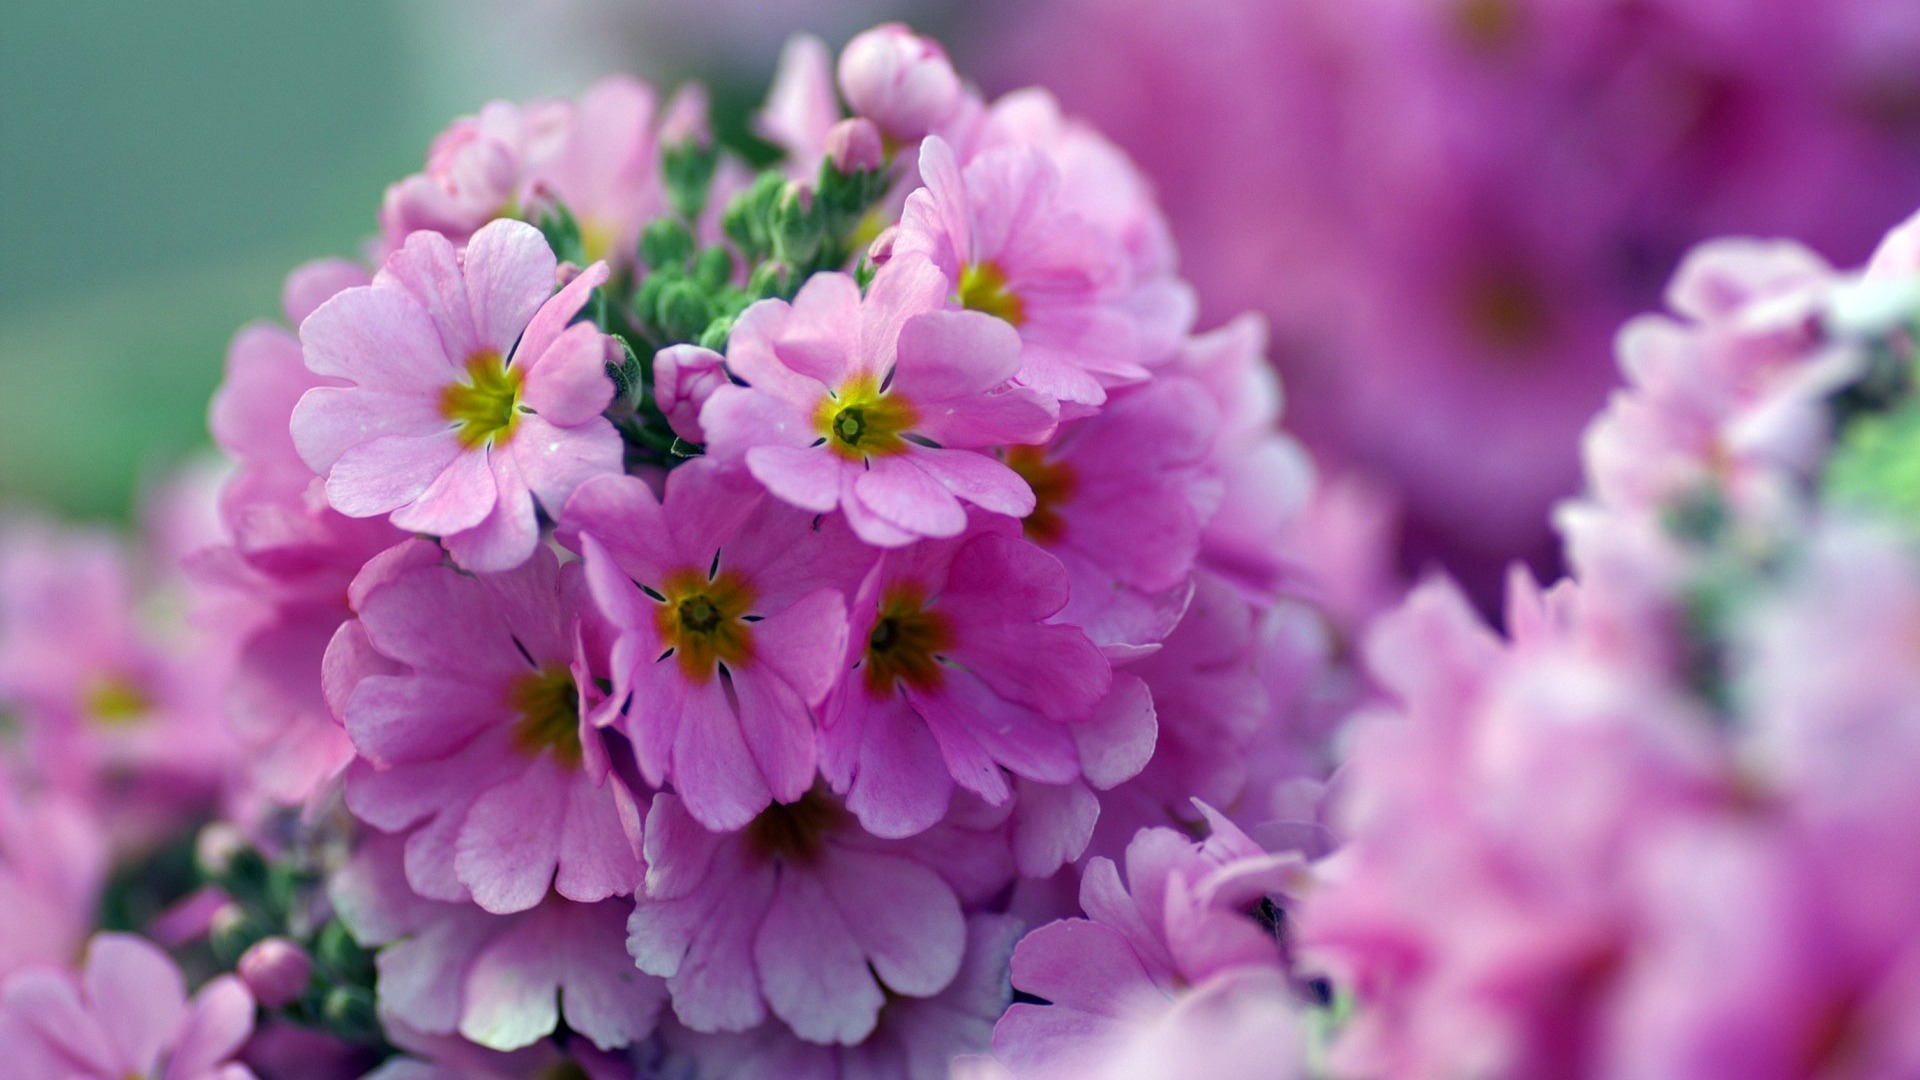 Personal Flowers HD Wallpapers #21 - 1920x1080